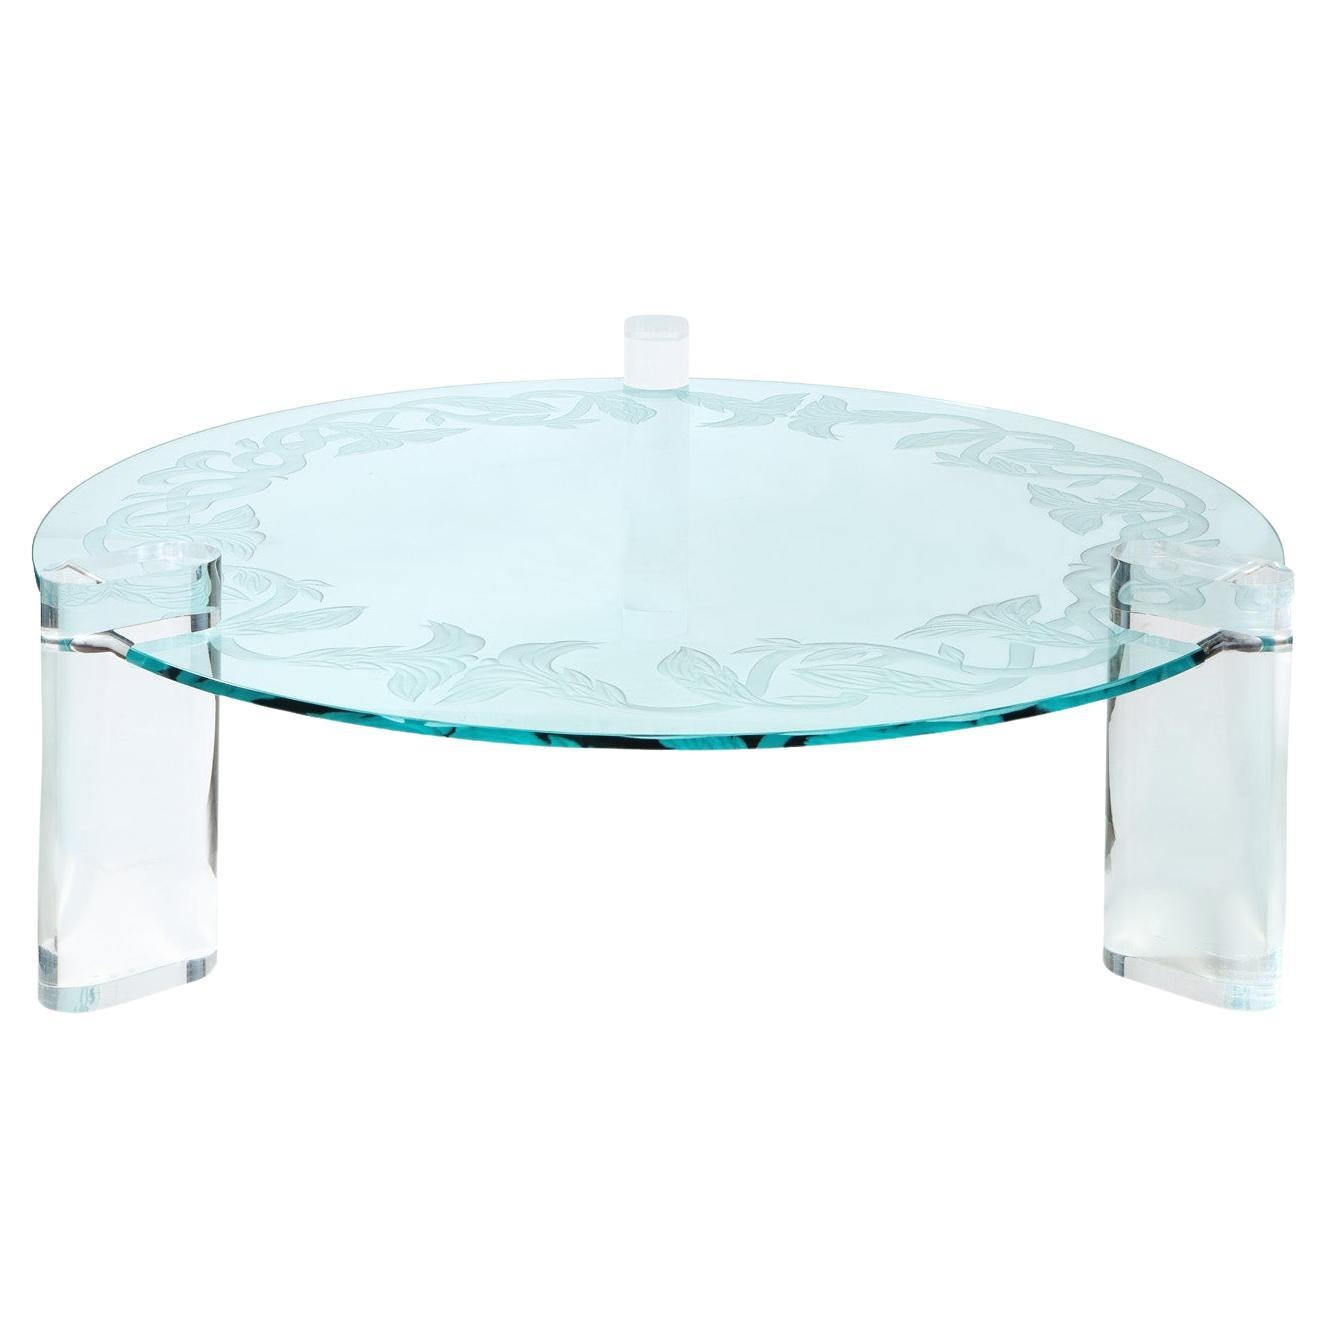 Karl Springer Coffee Table with Lucite Legs and Unique Glass Top 1980s (Signed) For Sale